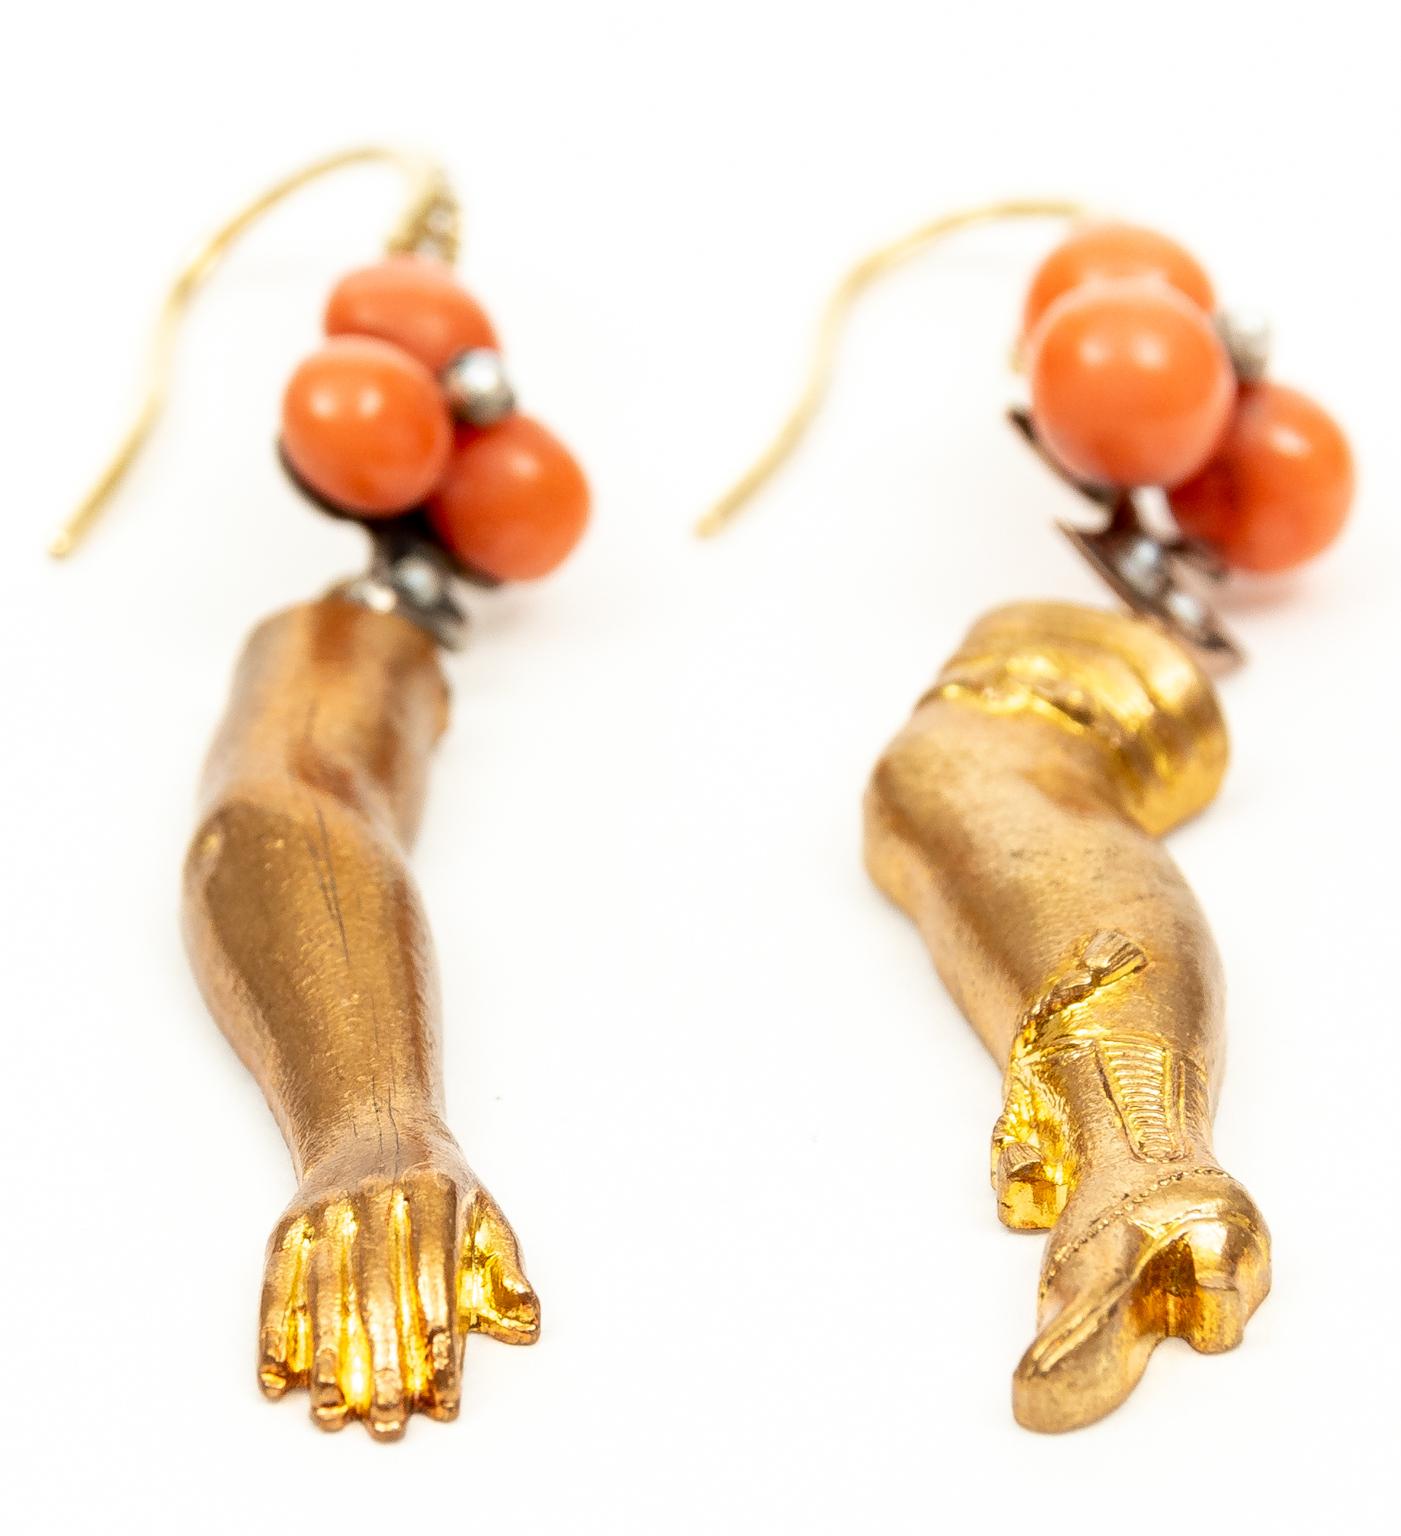 Pair of Vermeil Arm and Leg Earrings Titled 